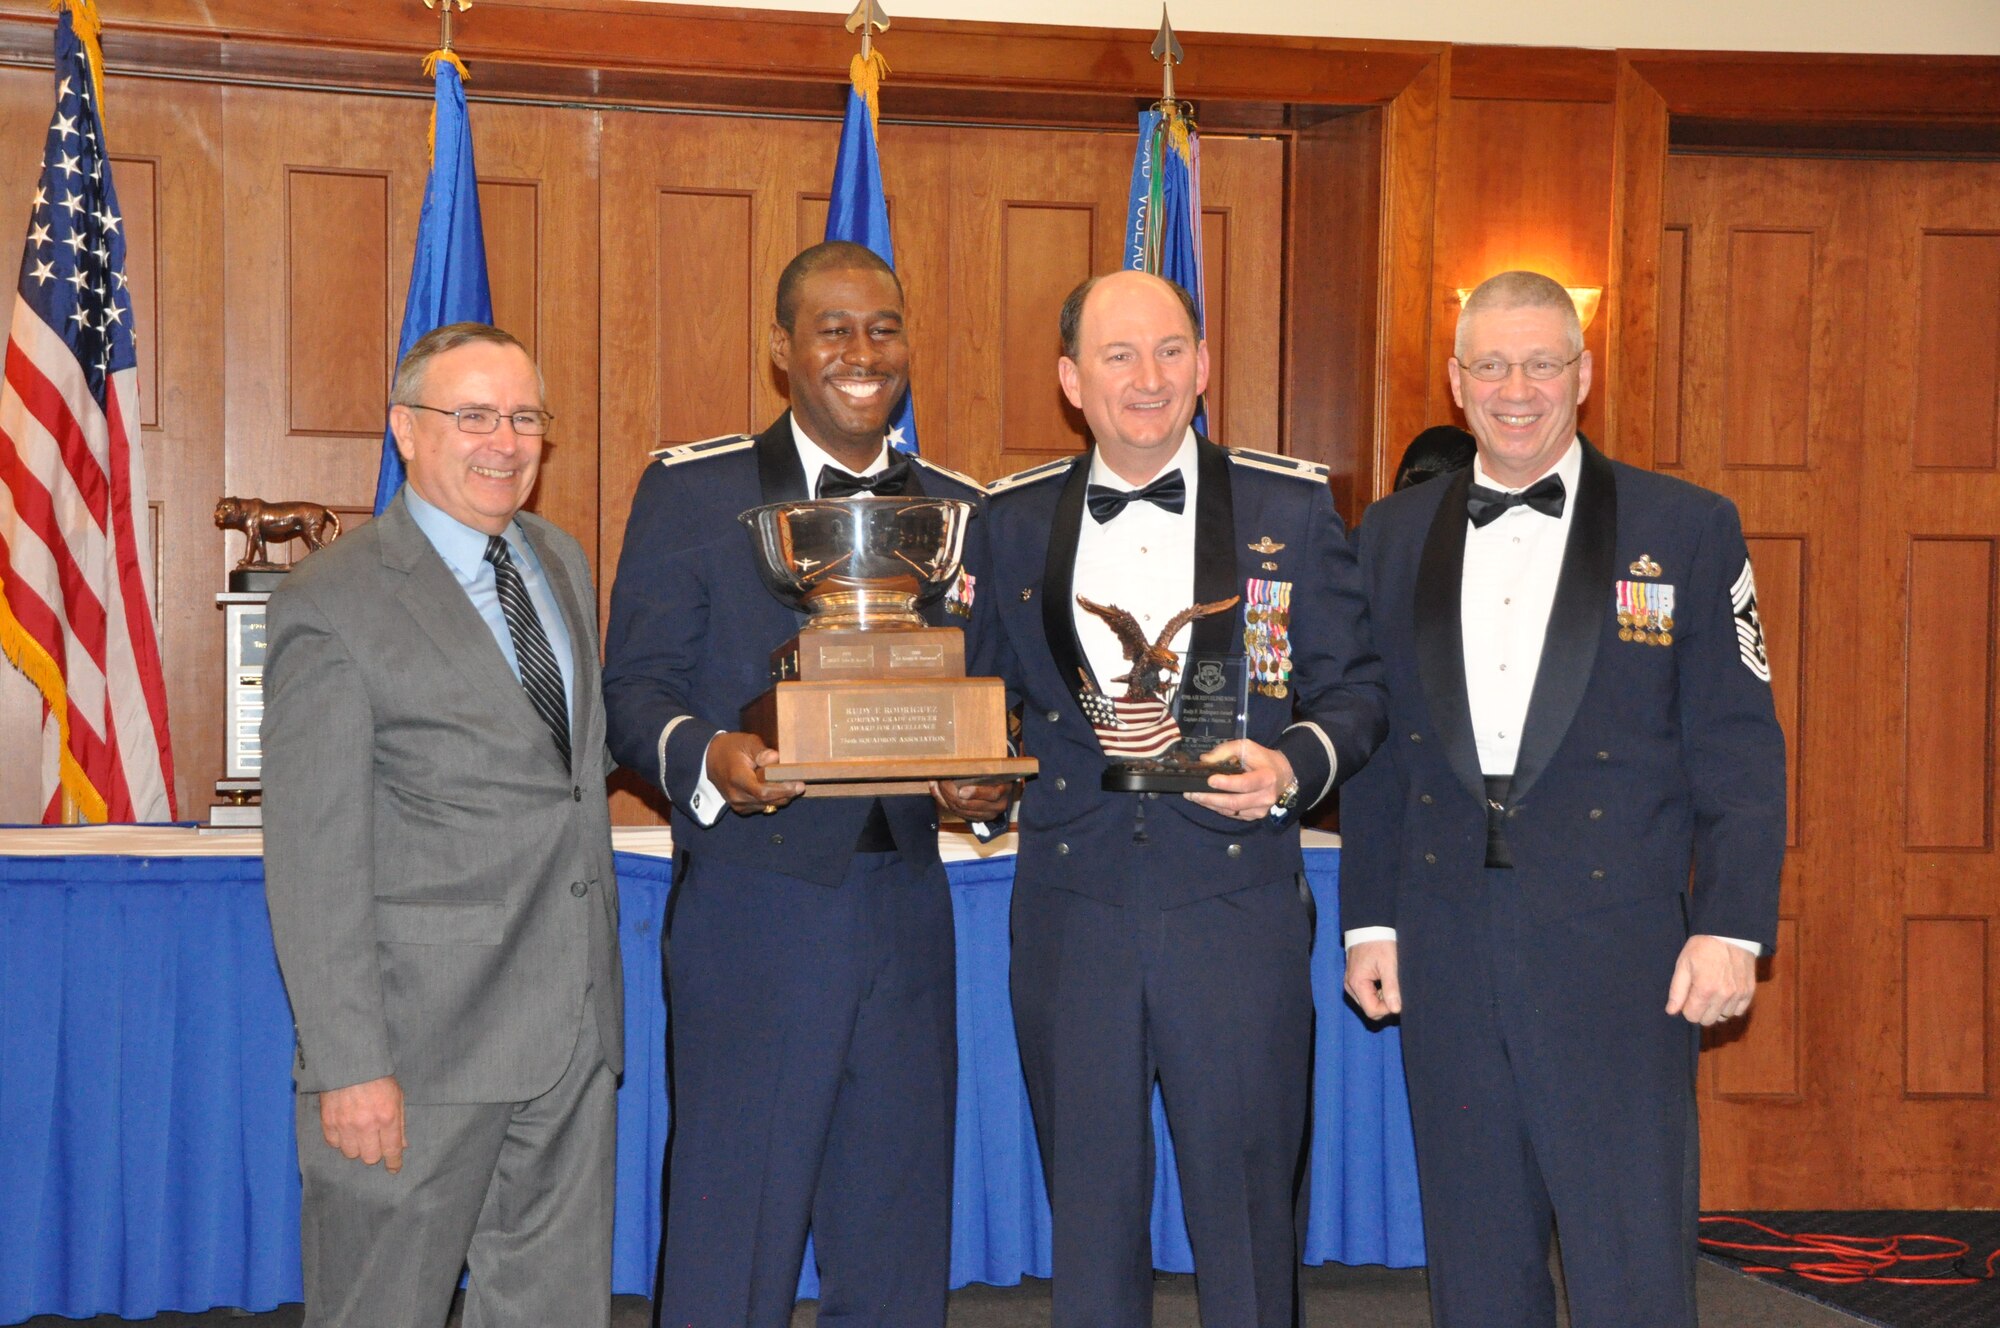 Capt. Ellis Haynes, 459th Equal Opportunity Office, wins the 459th Wing Association's Rudy F. Rodriguez Company Grade Officer Award for Excellence at the 459 ARW Annual Awards Banquet on Saturday, March 7, 2015. He is flanked by association president, Mr. Tim McConnell, the wing commander, Col. Thomas Smith, and the wing command chief, Chief Master Sgt. Tim Huffman. (Air Force Photo / SrA Kristin Kurtz)
